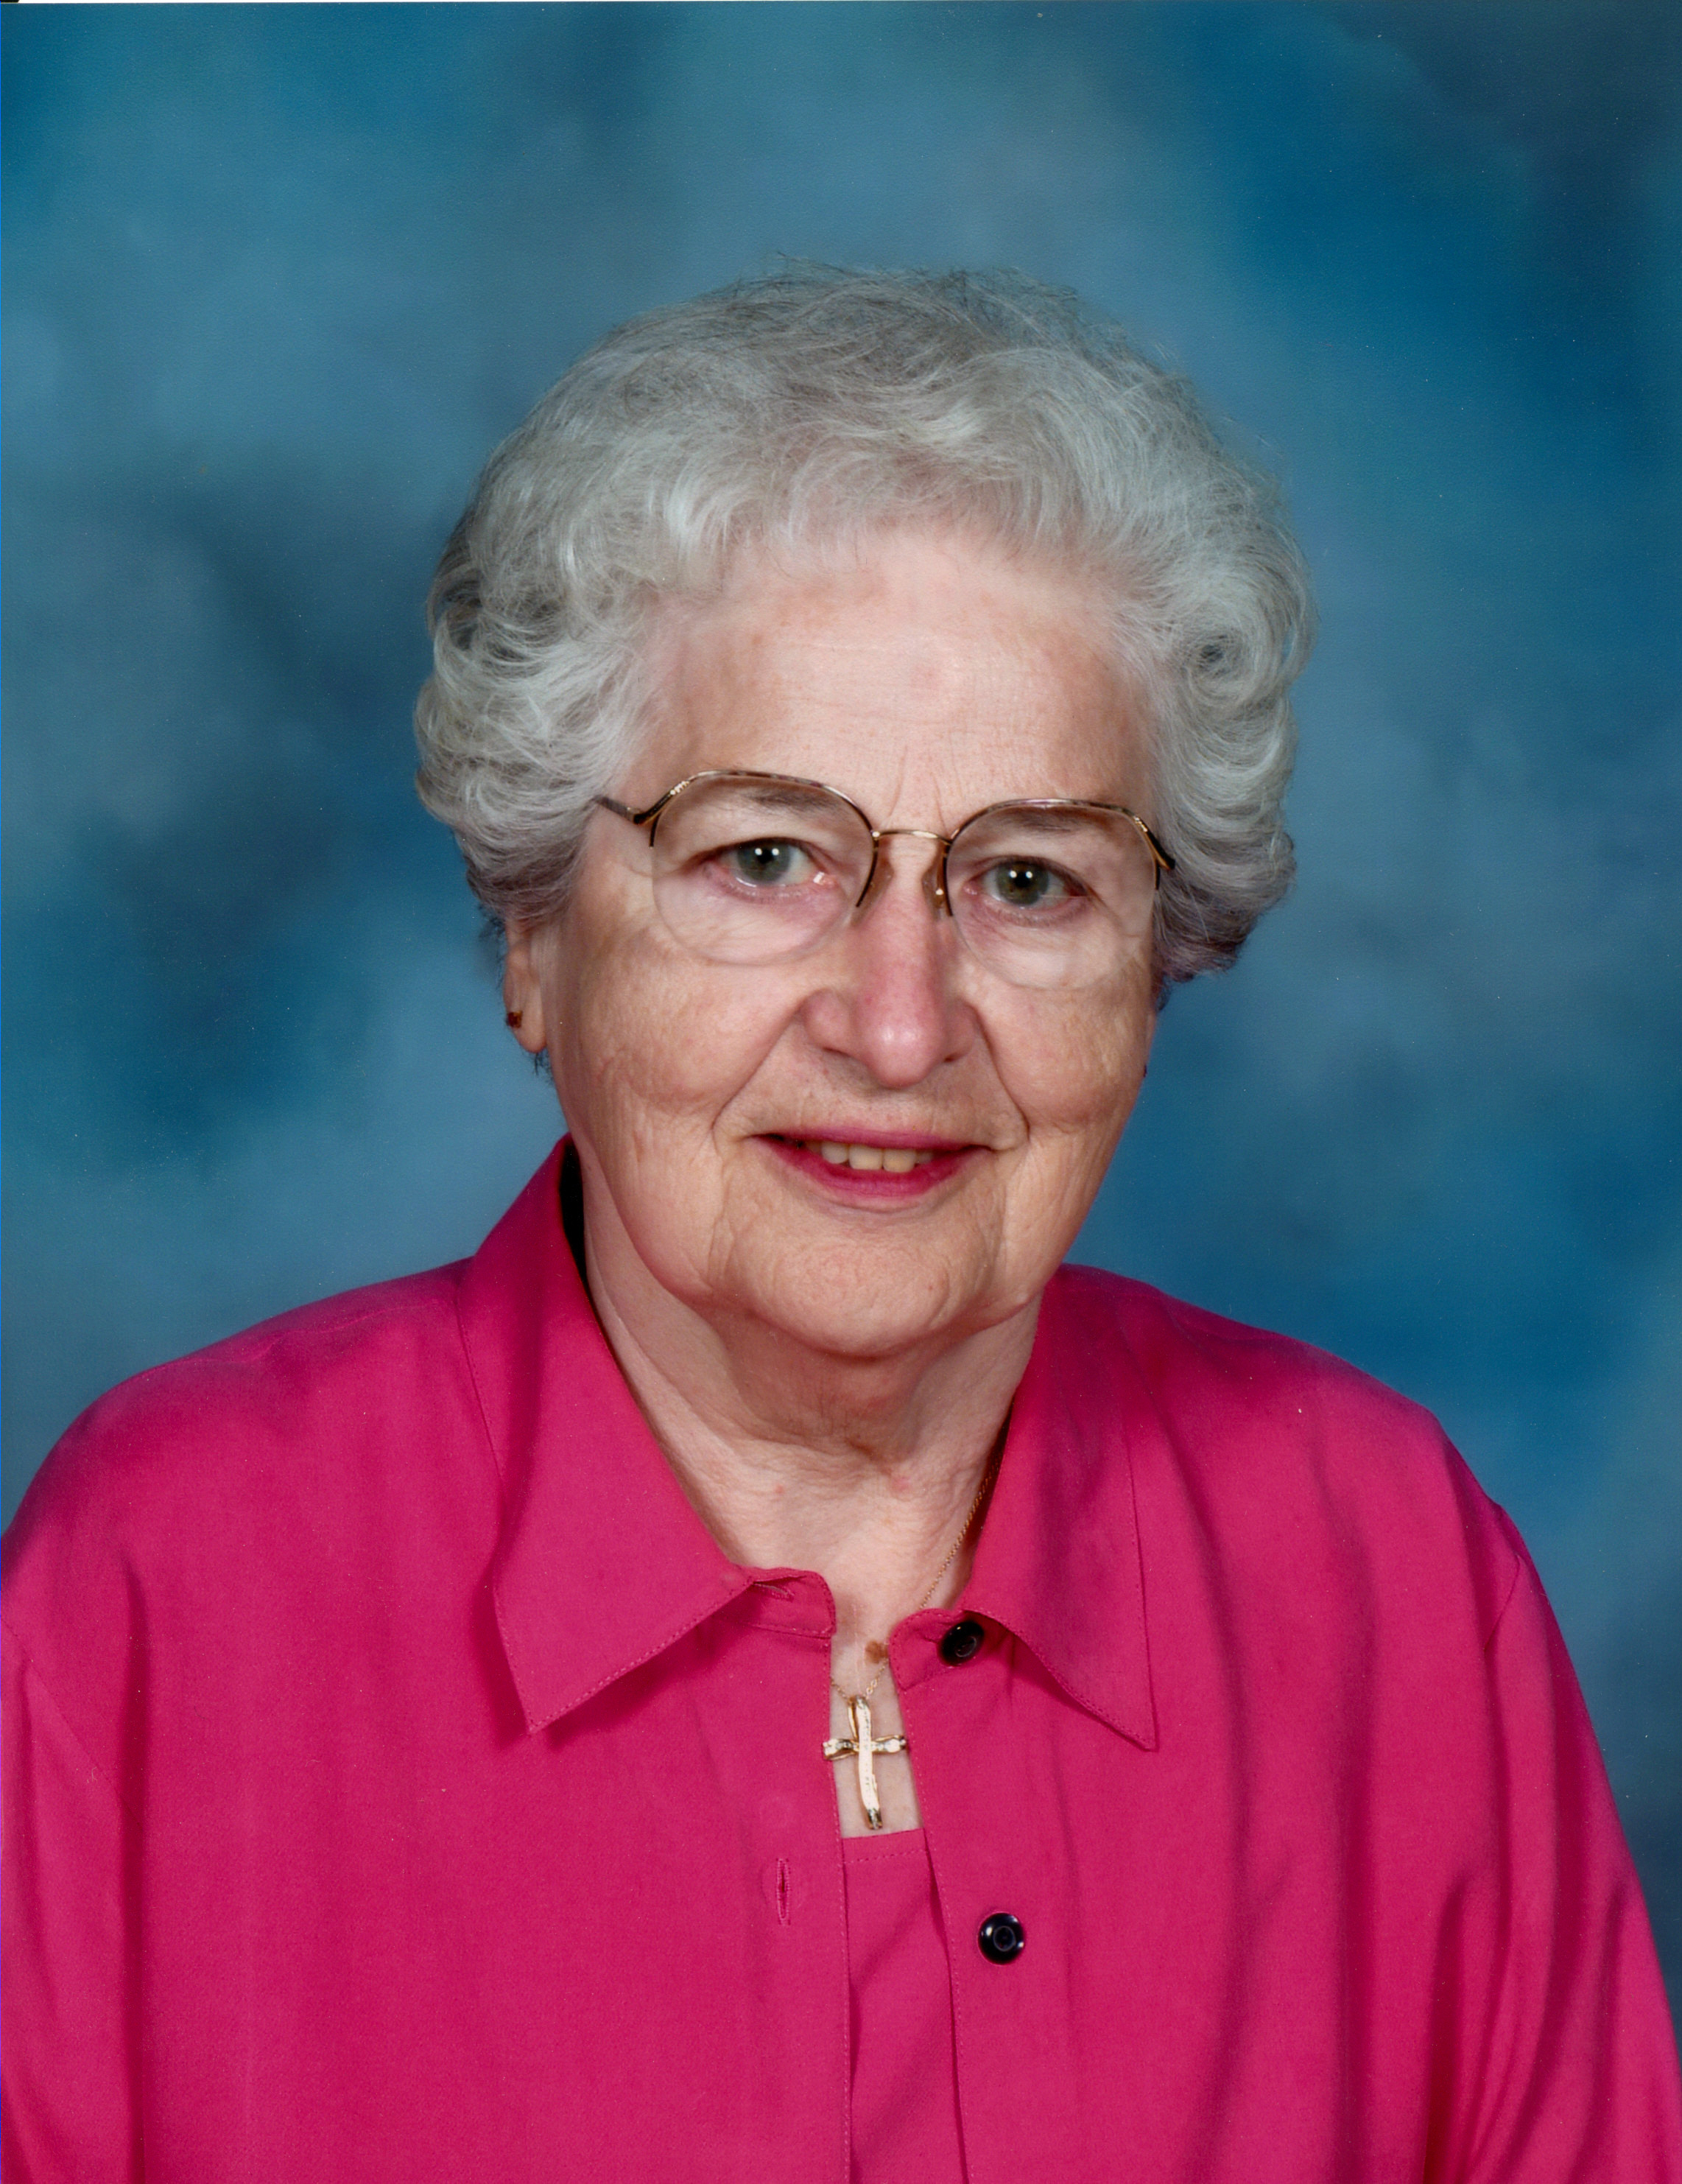 Obituary information for Barbara Engholm